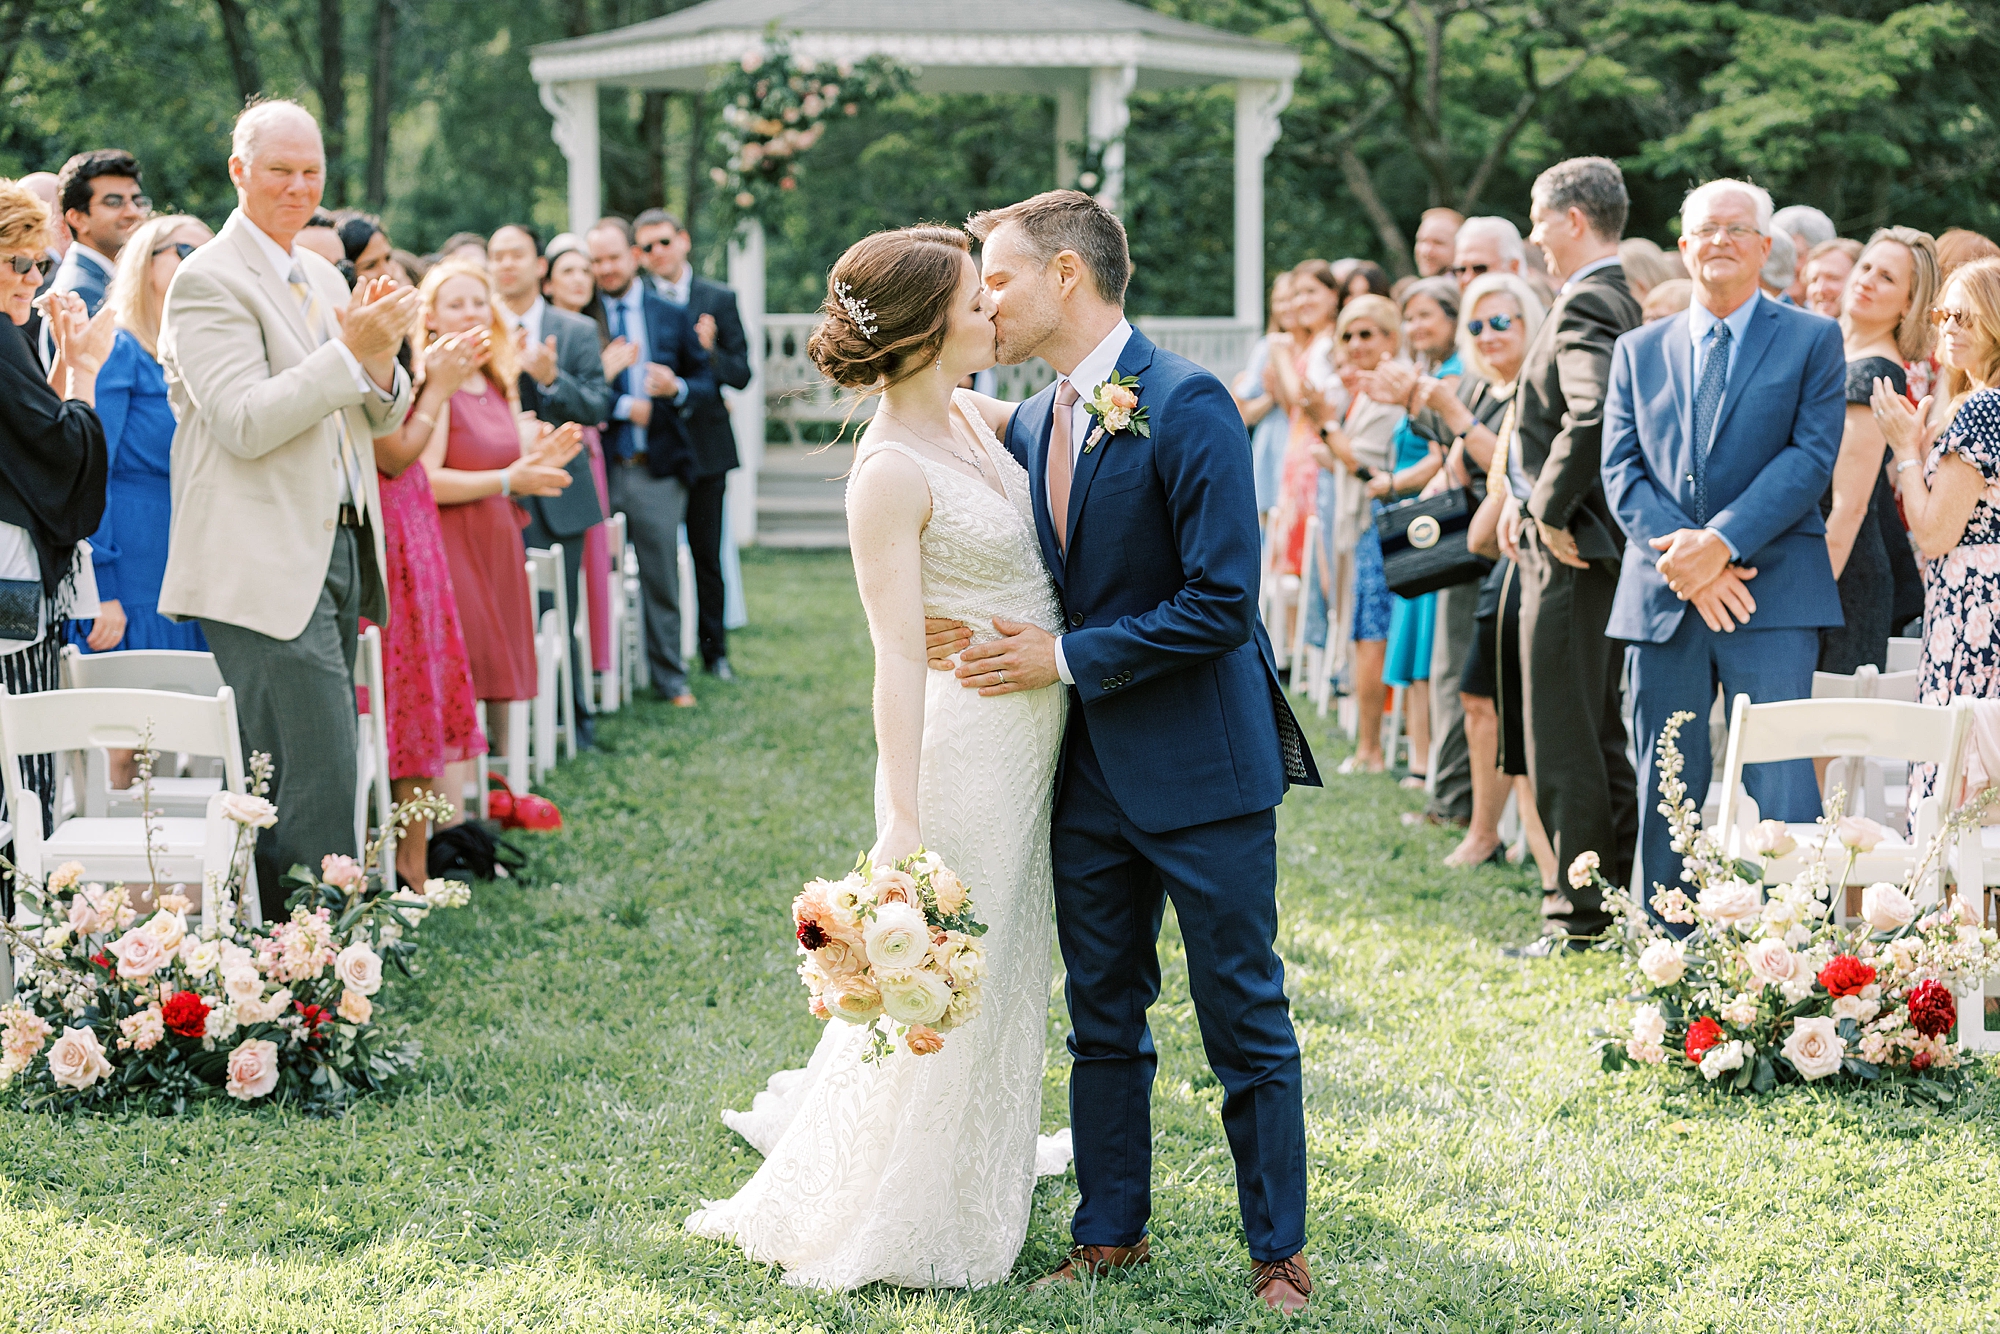 newlyweds kiss in aisle after wedding ceremony on lawn at Bellevue Hall